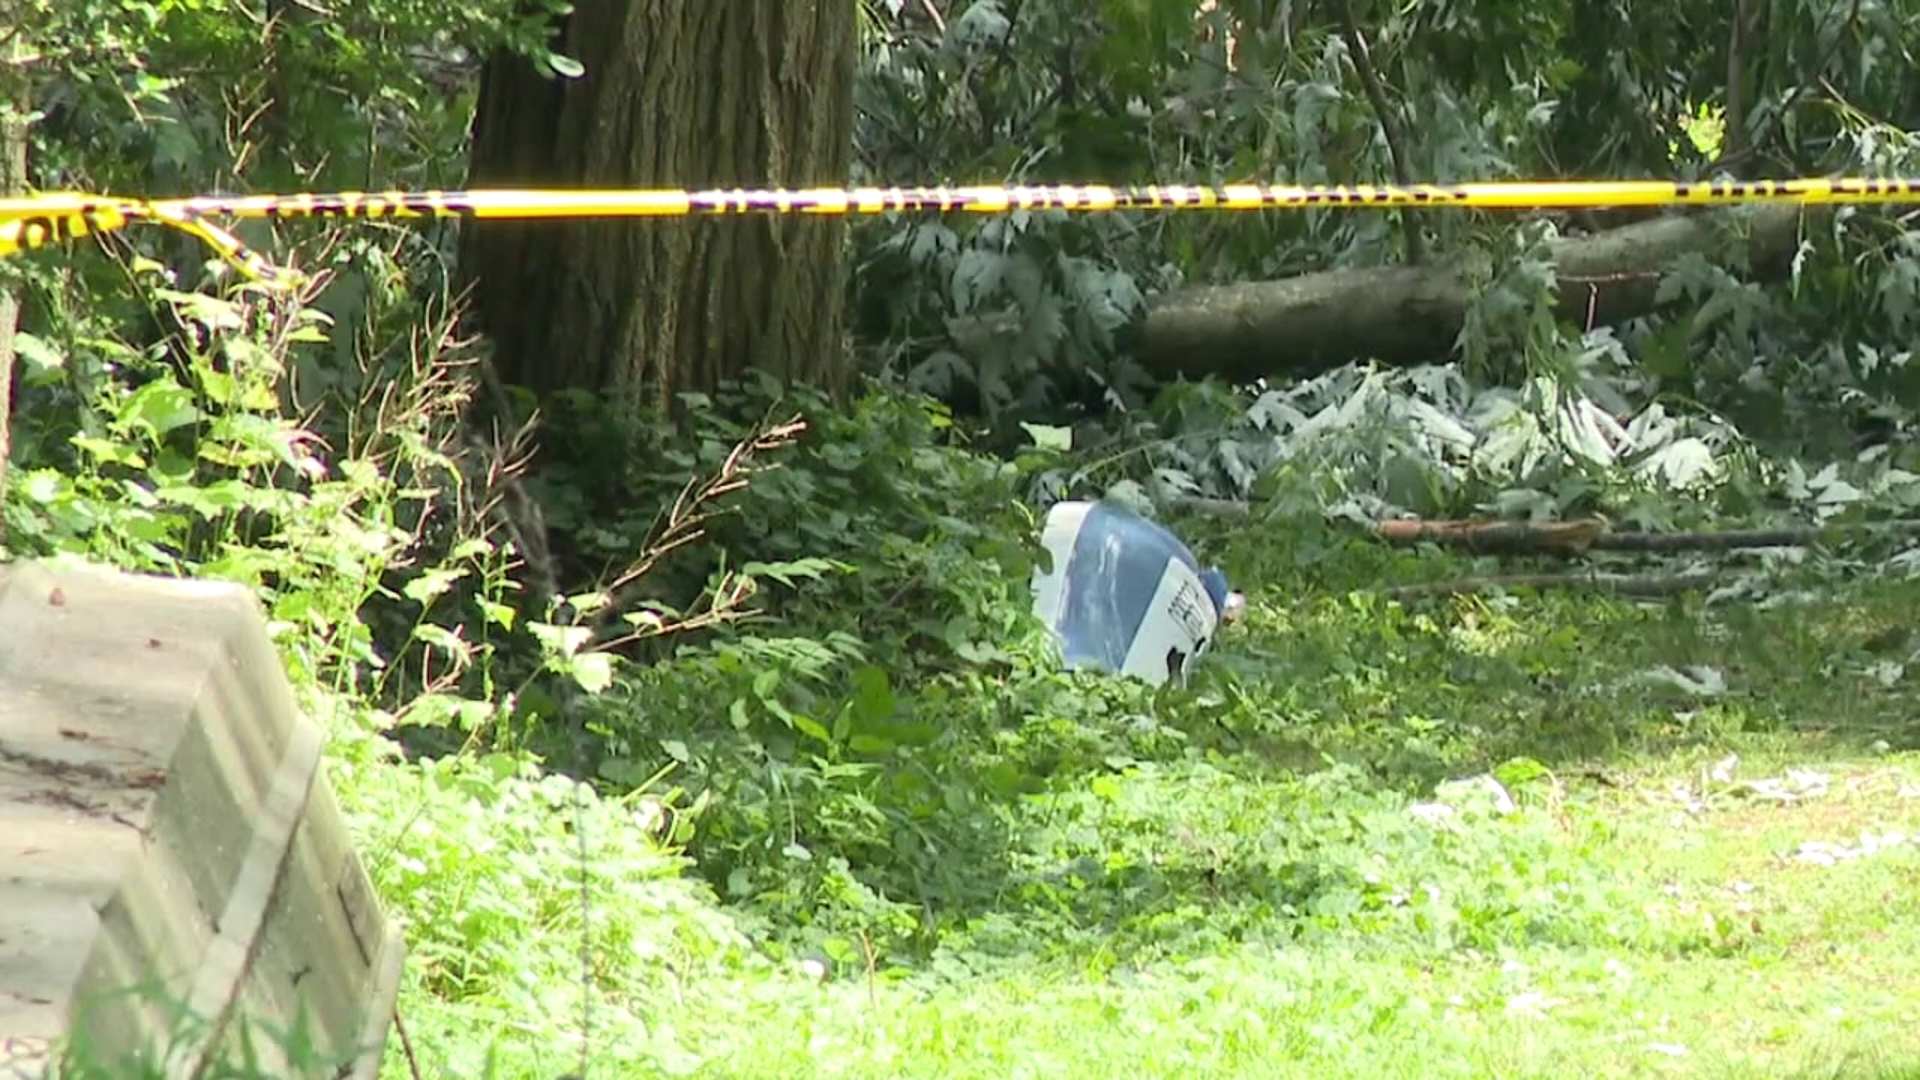 New details have emerged in a plane crash that killed a 17-year-old pilot in Clinton County.